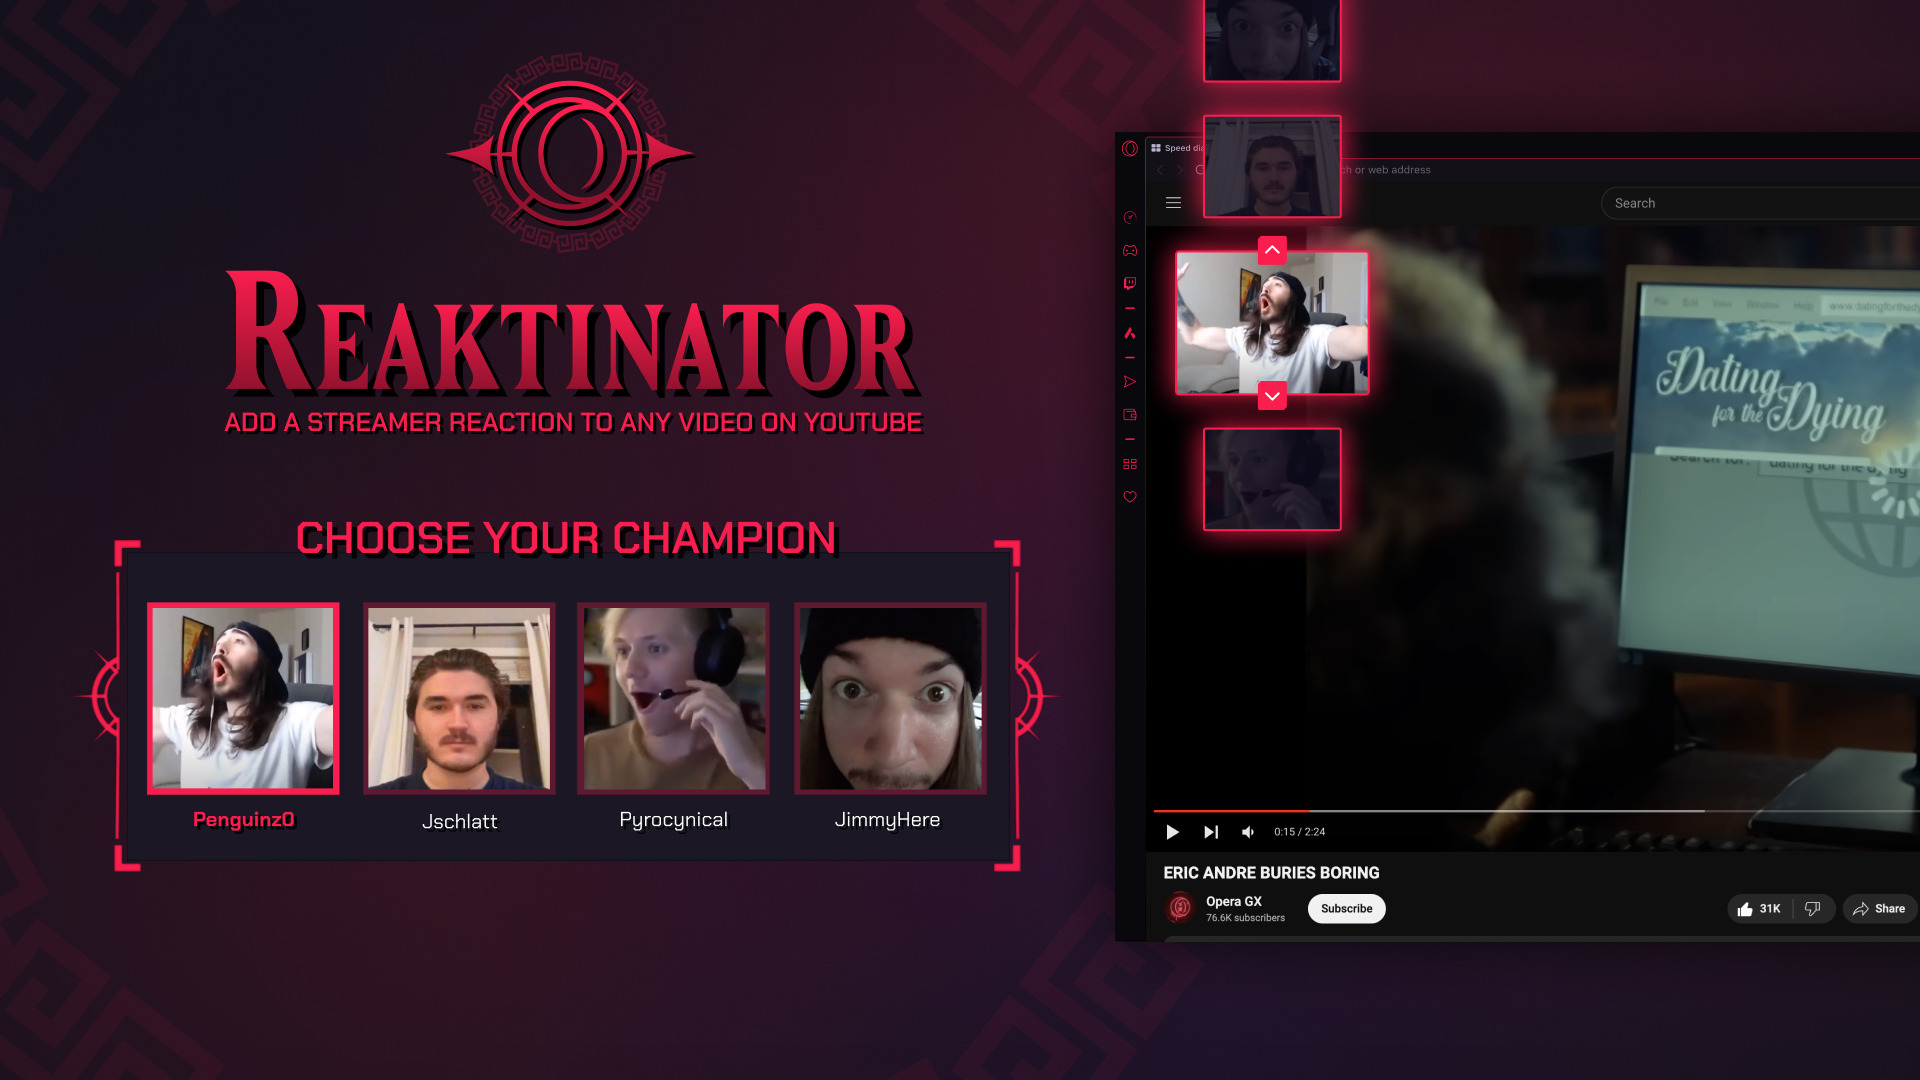 Reaktinator is OperaGX's new feature that allows you to create a reaction clip to any YouTube video. Simply press Ctrl + Shift + R, choose a reaction from the library or upload your custom one, and you are good to go.